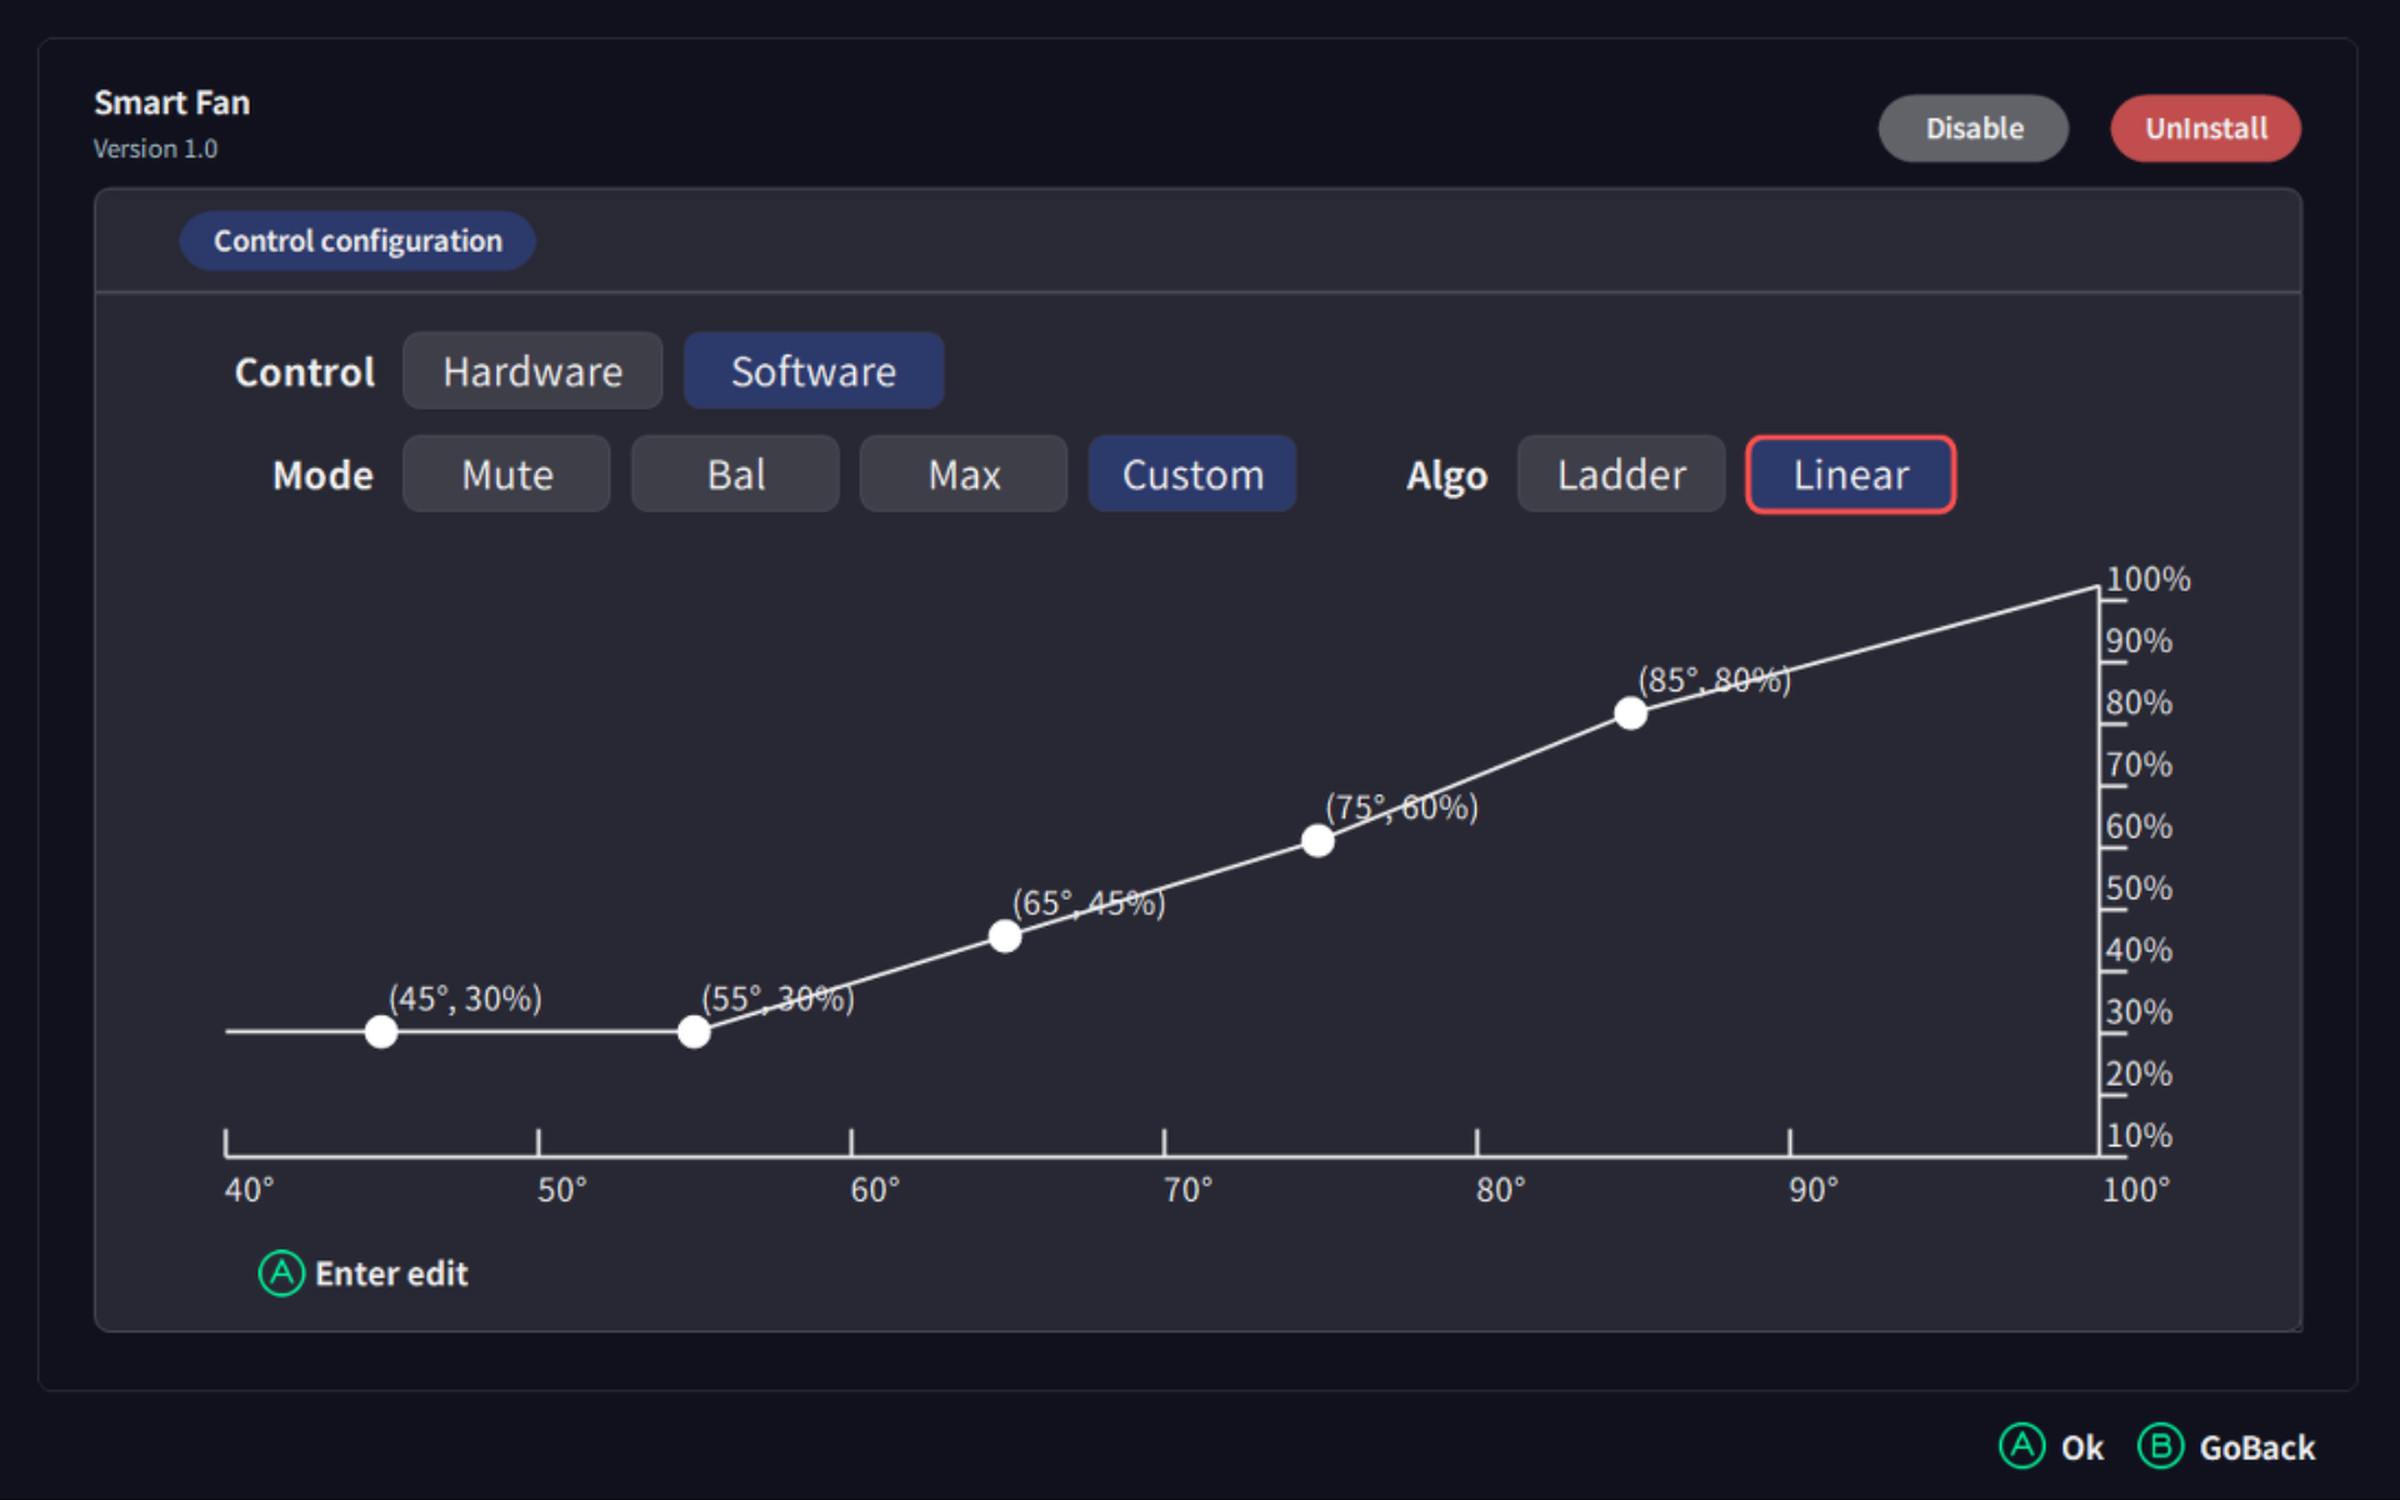 One bright spot: the ability to set custom fan curves and/or ladders. 